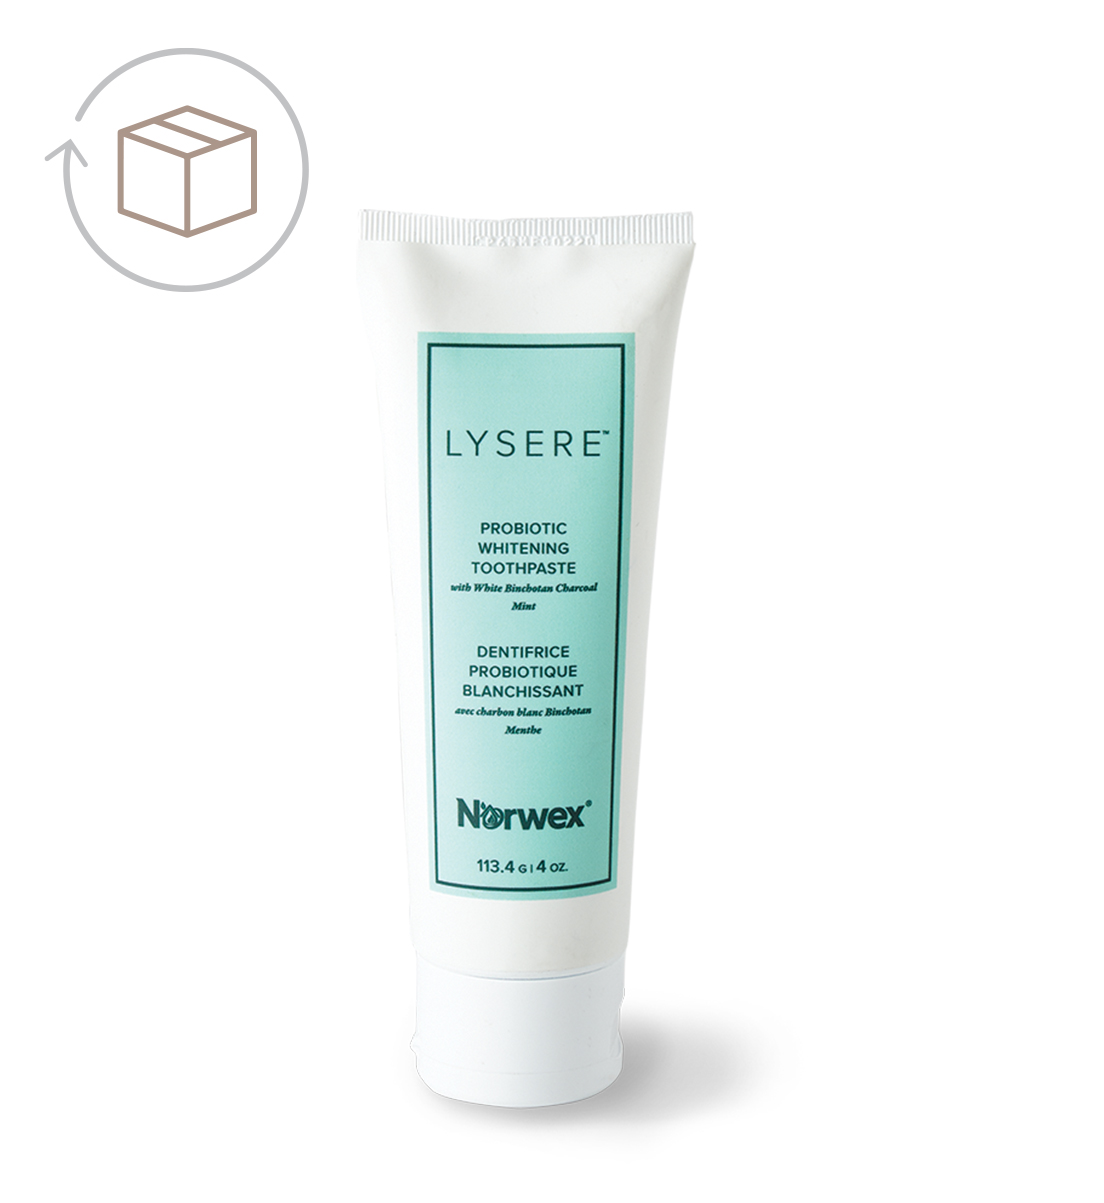 Lysere Probiotic Whitening Toothpaste